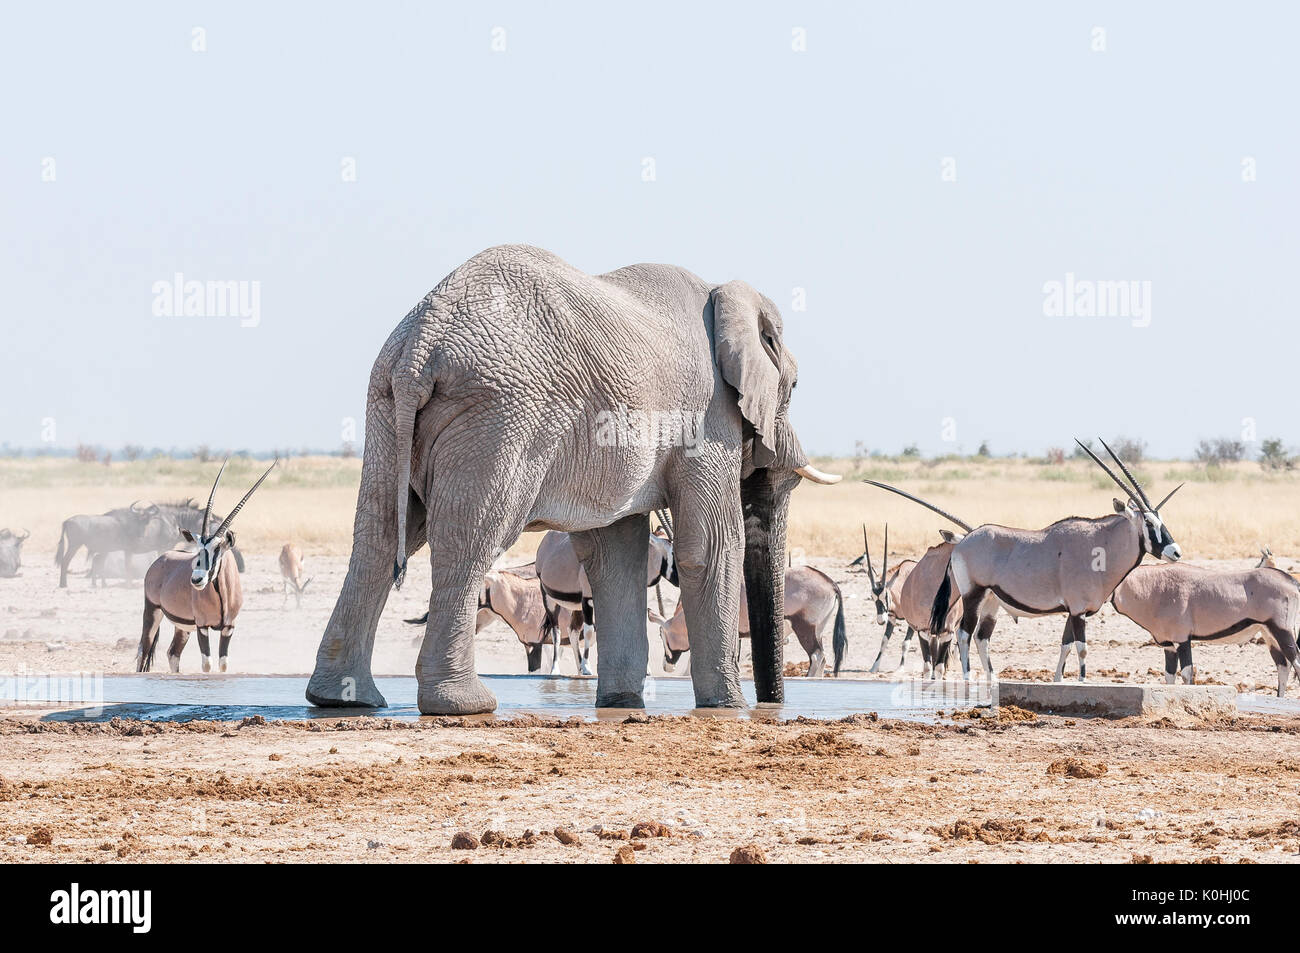 An African elephant drinking water at a waterhole in Northern Namibia. Oryx, blue wildebeest and springbok are also visible Stock Photo